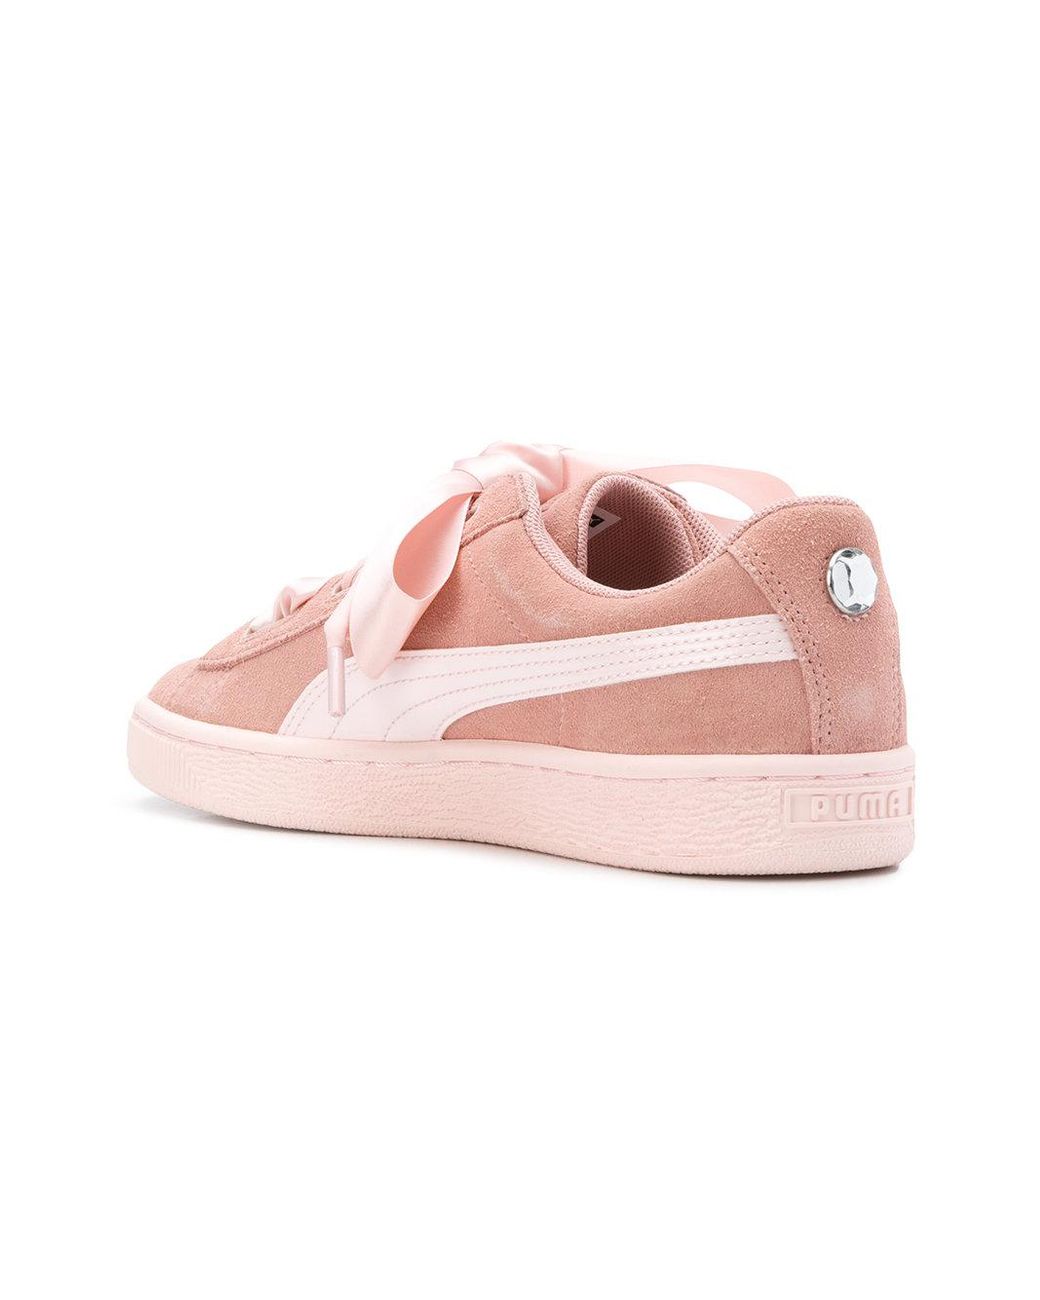 PUMA Leather Ribbon Lace-up Sneakers in Pink & Purple (Pink) | Lyst